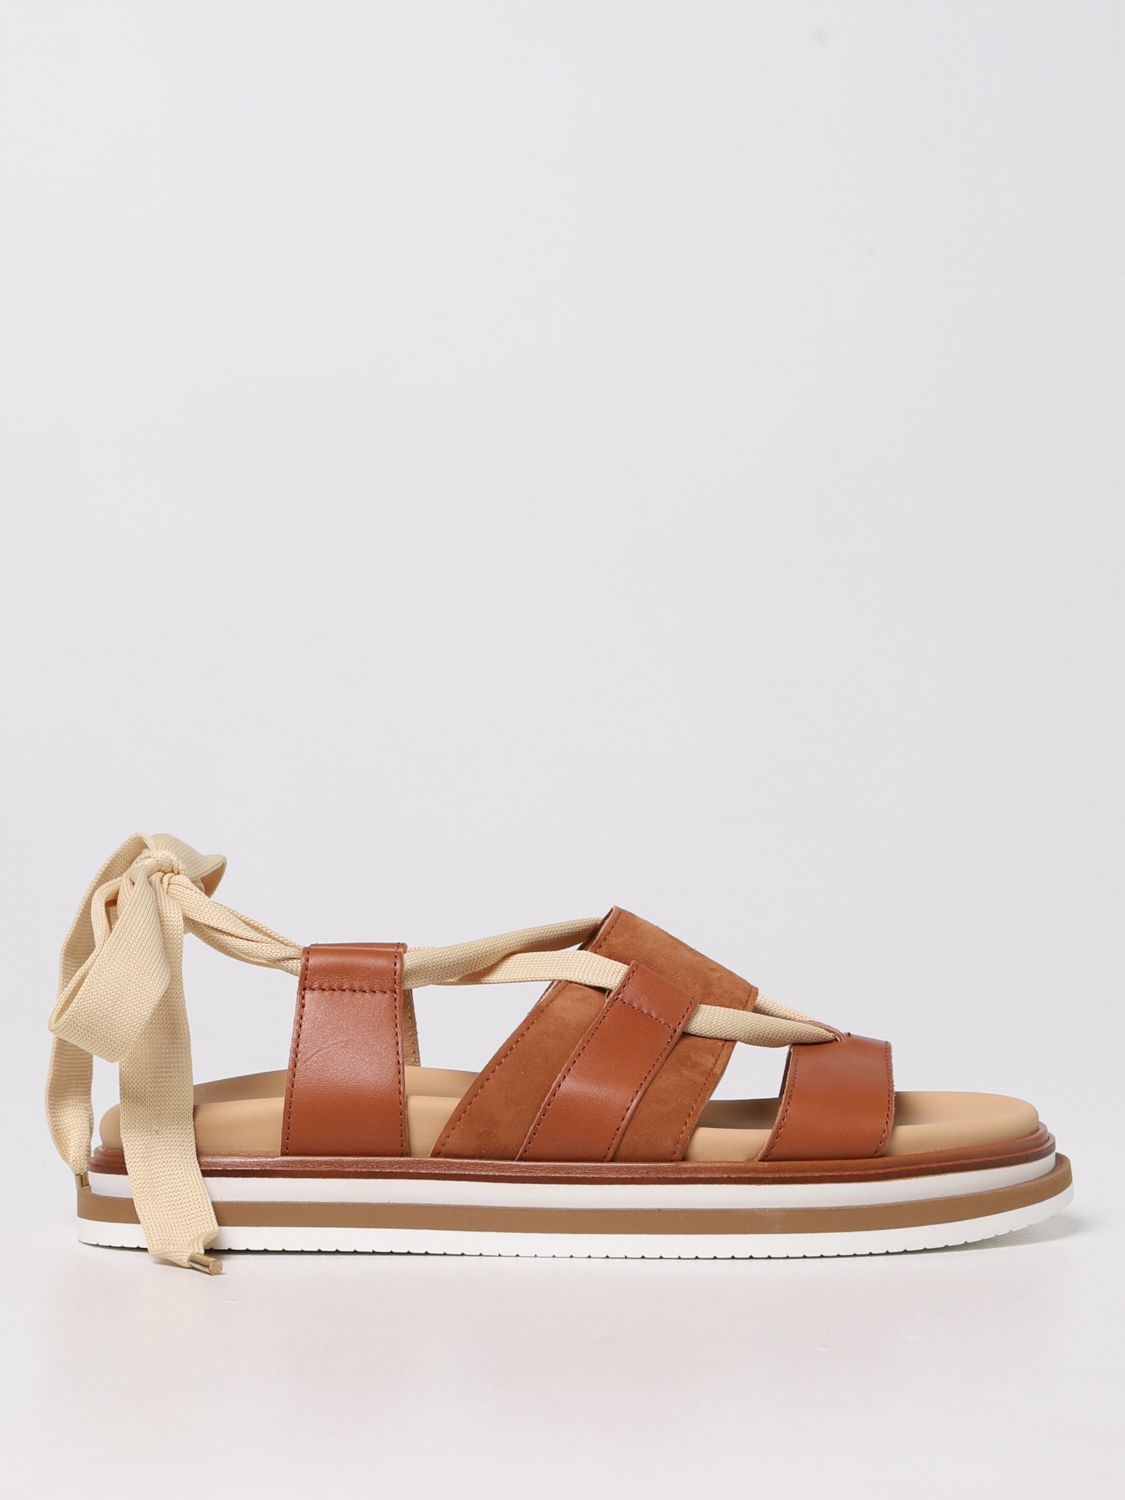 HOGAN SANDAL H567 HOGAN IN LEATHER AND SUEDE,357622107